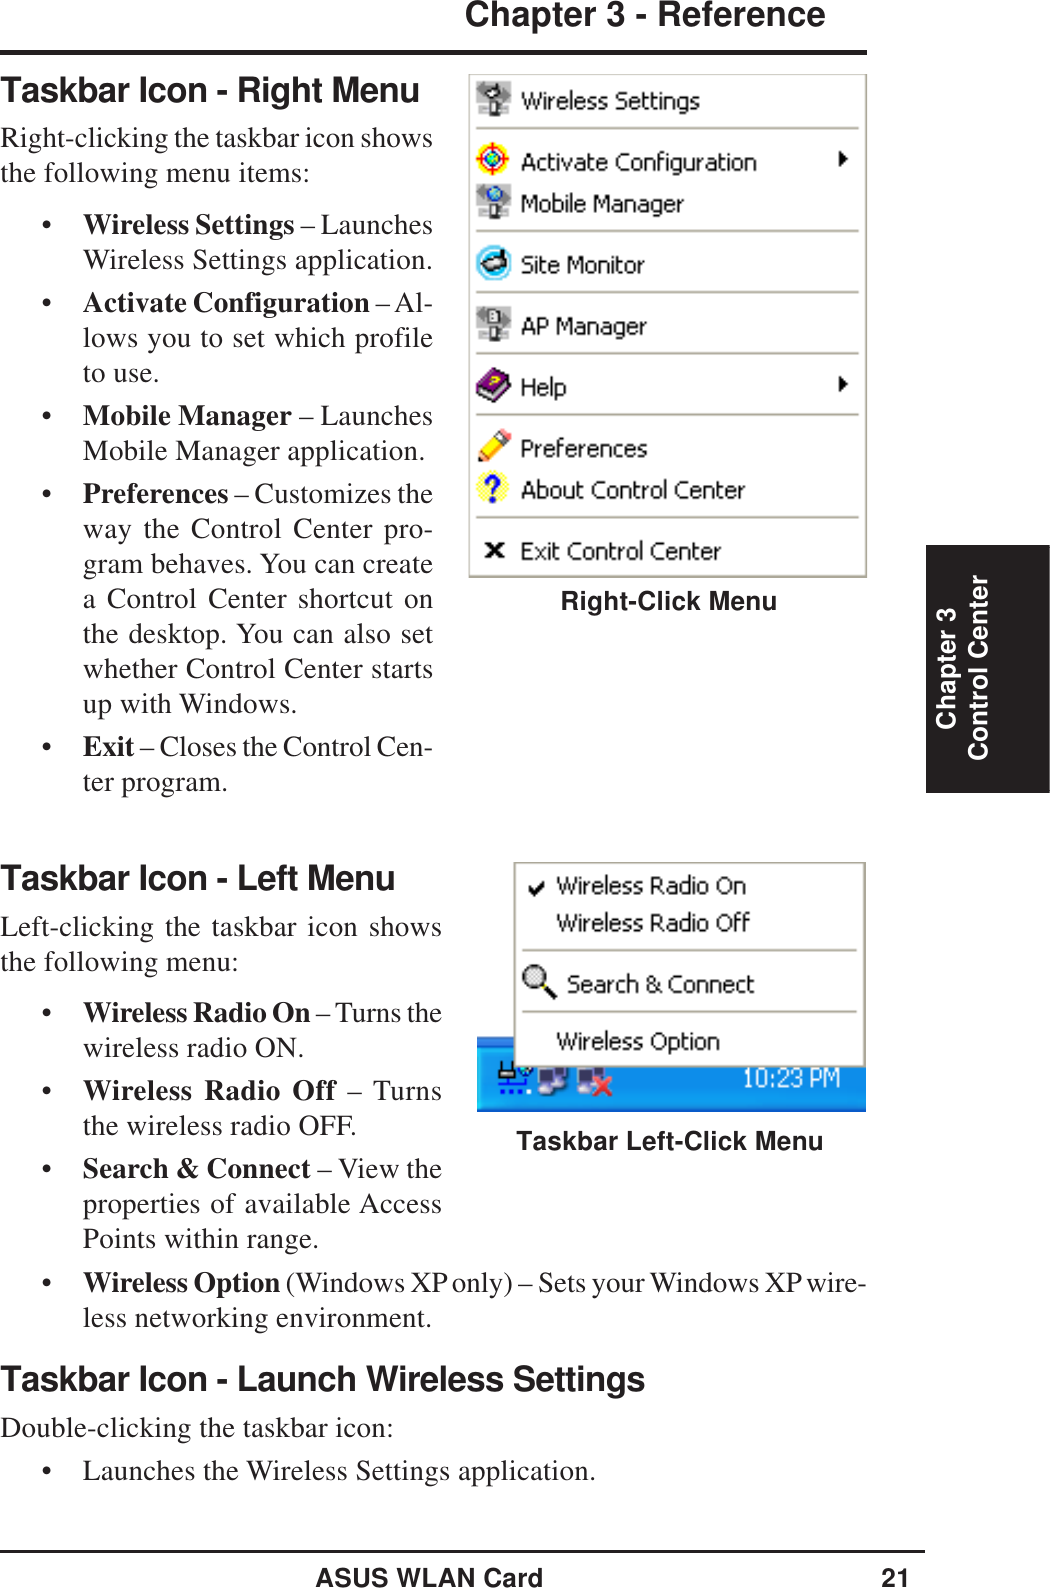 ASUS WLAN Card 21Chapter 3 - ReferenceChapter 3Control CenterTaskbar Icon - Left MenuLeft-clicking the taskbar icon showsthe following menu:•Wireless Radio On – Turns thewireless radio ON.•Wireless Radio Off – Turnsthe wireless radio OFF.•Search &amp; Connect – View theproperties of available AccessPoints within range.•Wireless Option (Windows XP only) – Sets your Windows XP wire-less networking environment.Taskbar Icon - Launch Wireless SettingsDouble-clicking the taskbar icon:• Launches the Wireless Settings application.Taskbar Left-Click MenuTaskbar Icon - Right MenuRight-clicking the taskbar icon showsthe following menu items:•Wireless Settings – LaunchesWireless Settings application.•Activate Configuration – Al-lows you to set which profileto use.•Mobile Manager – LaunchesMobile Manager application.•Preferences – Customizes theway the Control Center pro-gram behaves. You can createa Control Center shortcut onthe desktop. You can also setwhether Control Center startsup with Windows.•Exit – Closes the Control Cen-ter program.Right-Click Menu